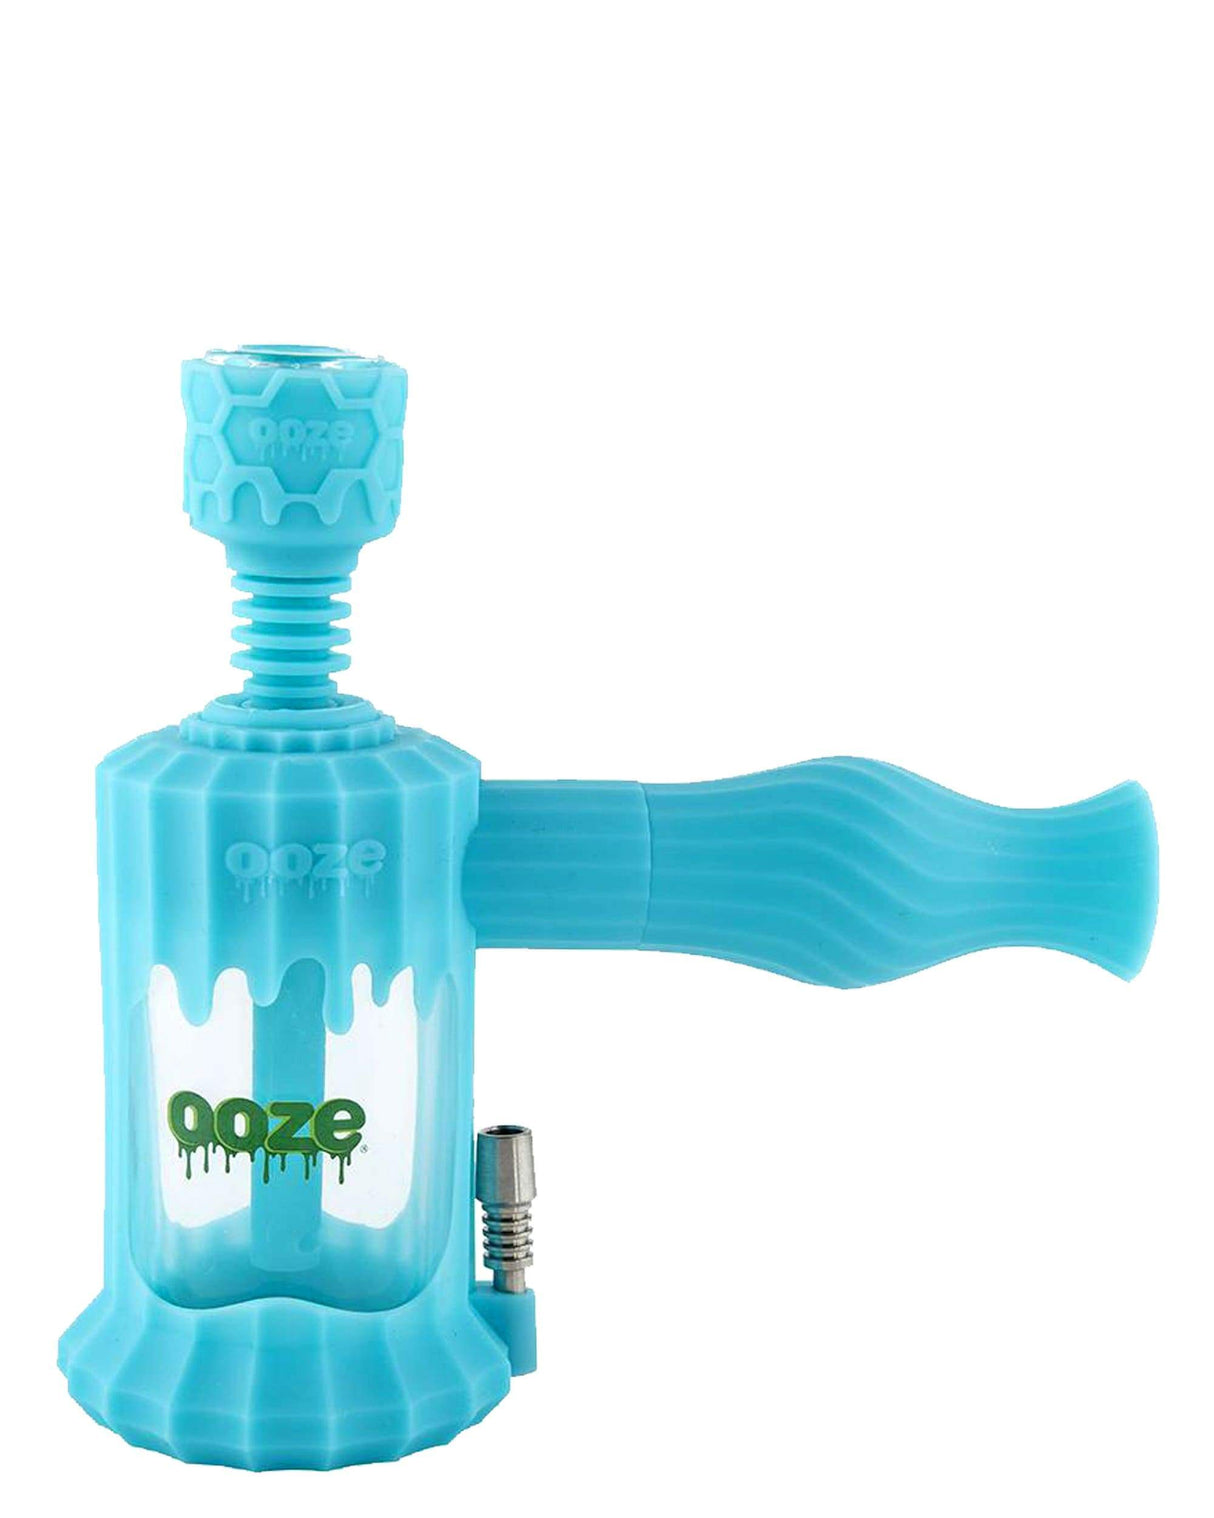 Ooze Clobb 4-in-1 Silicone Pipe in Teal, Hammer Design, Side View for Dry Herbs and Concentrates